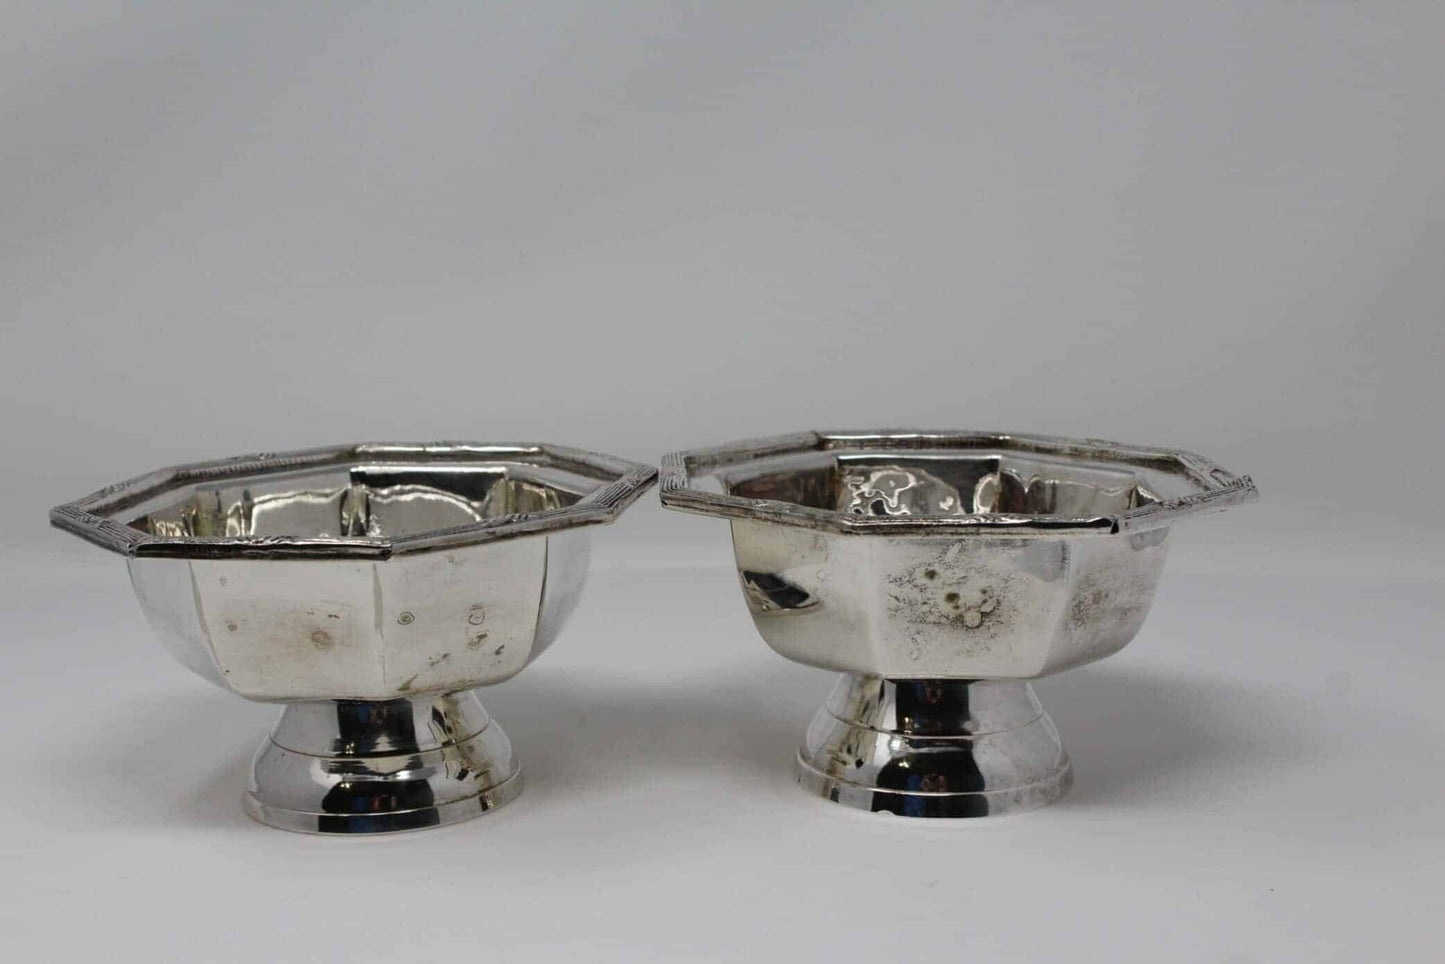 Bowls, Silver Plate, Octagon Shaped, Set of 2, Vintage - Reduced